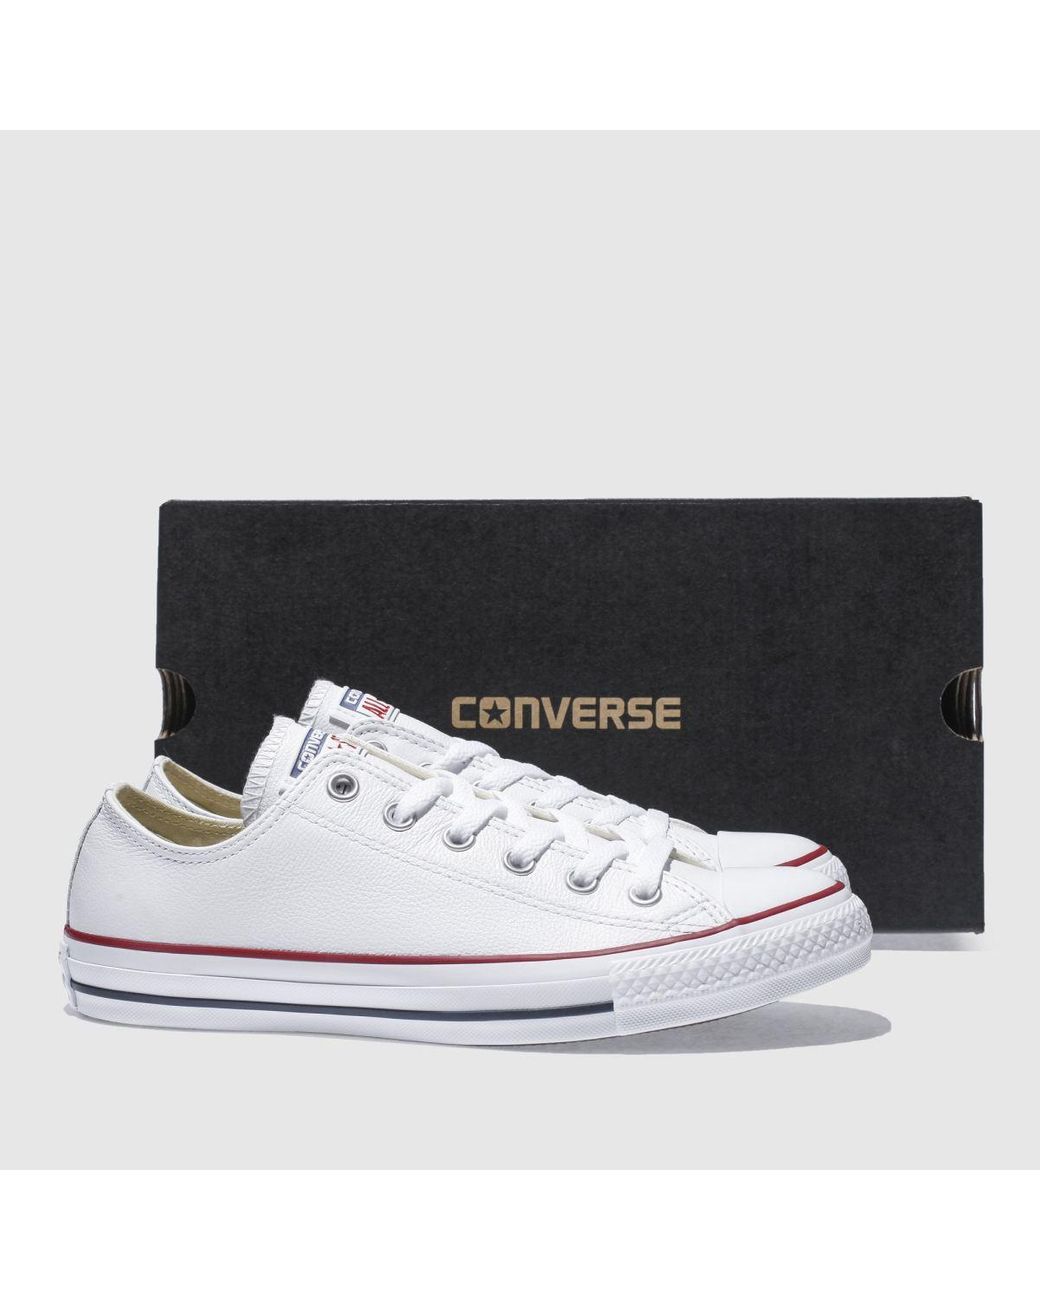 converse all star leather ox white - 57 